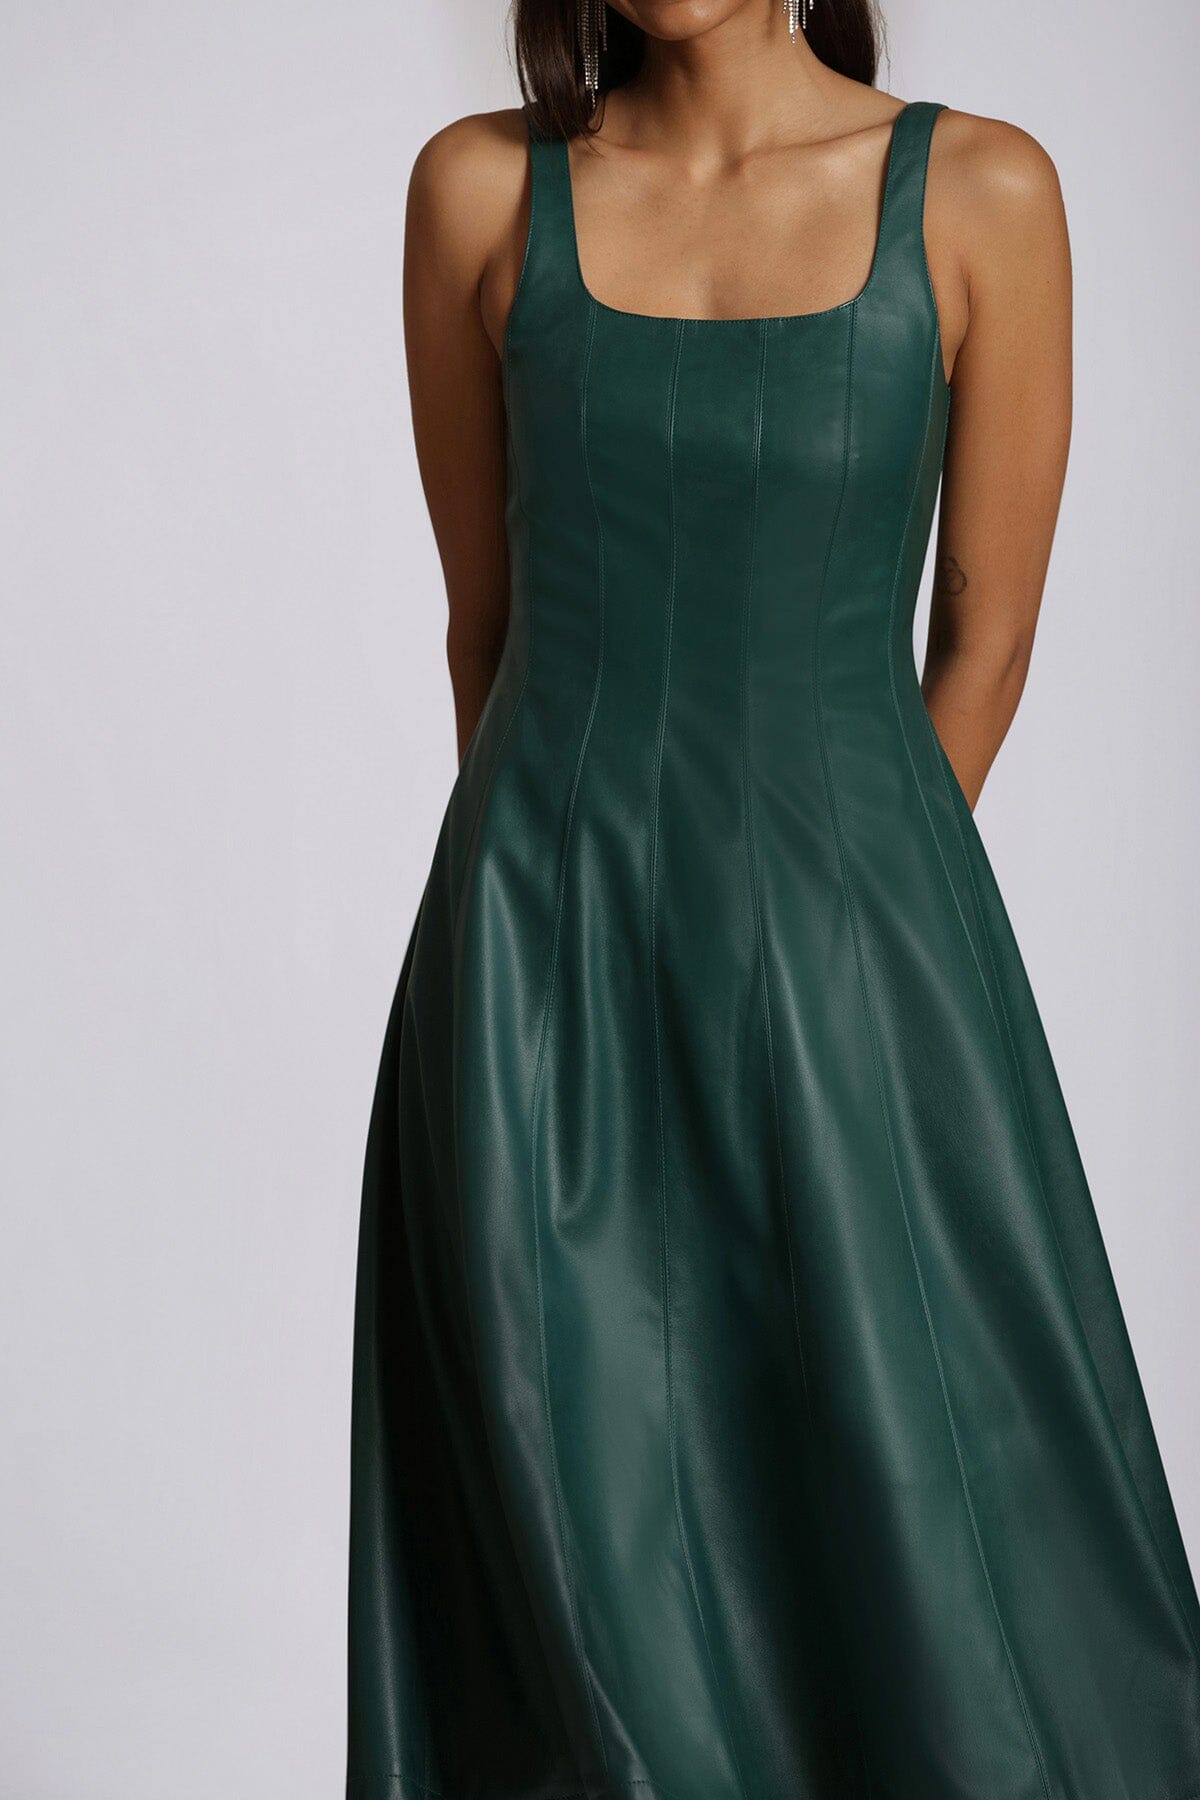 faux ever leather fit and flare midi dress pine green - women's figure flattering designer fashion office to date night dresses for women